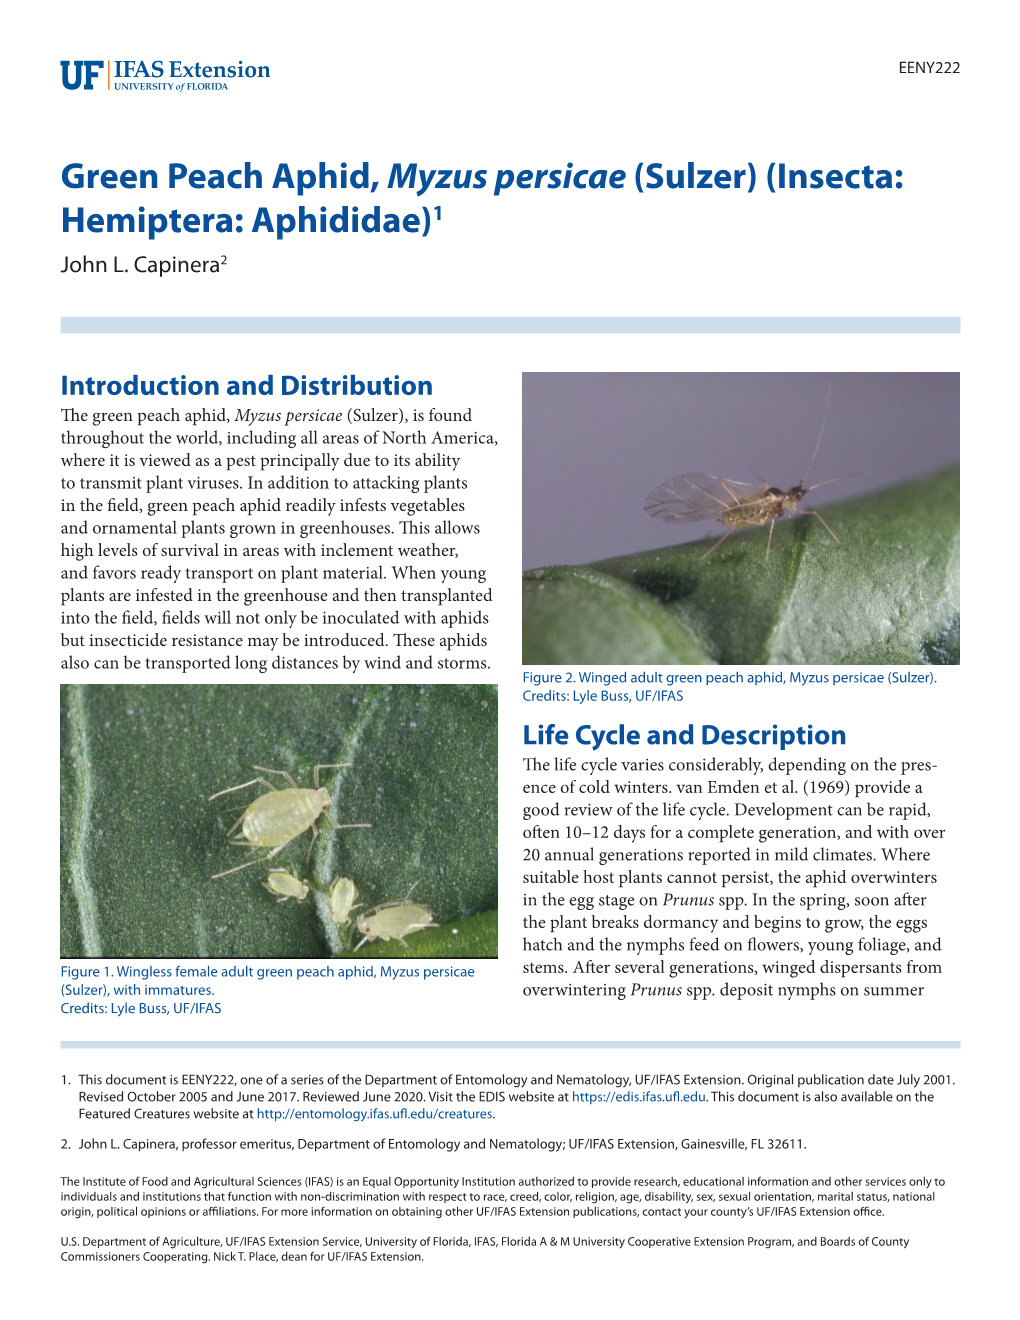 Green Peach Aphid, Myzus Persicae (Sulzer) (Insecta: Hemiptera: Aphididae)1 John L